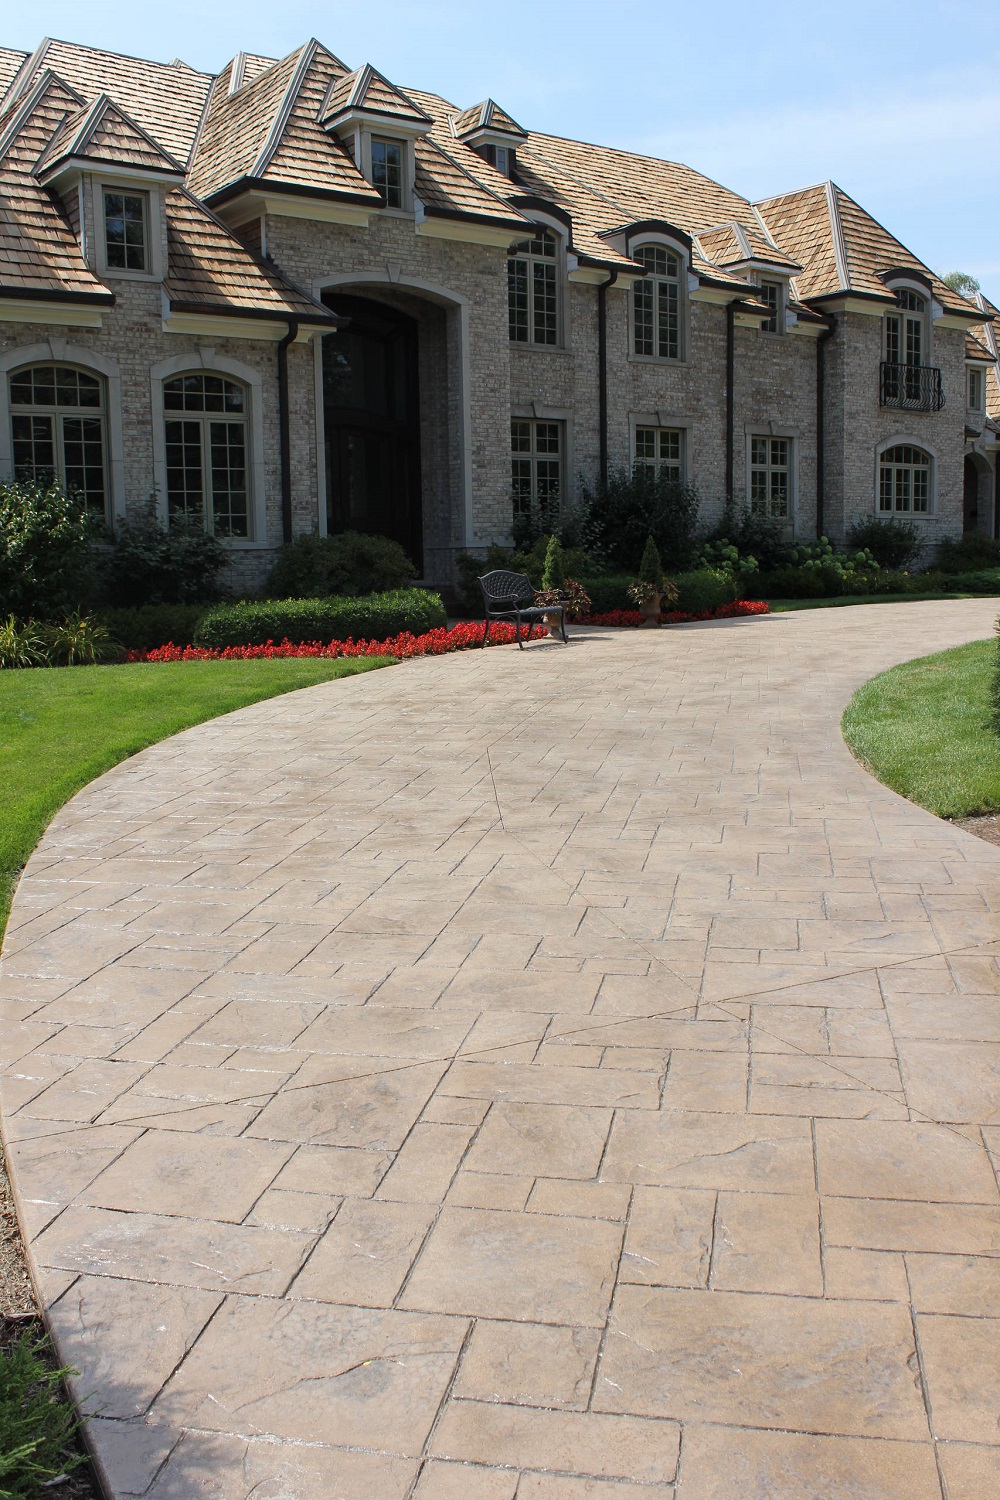 dw10 The types of driveways that you could have for your house